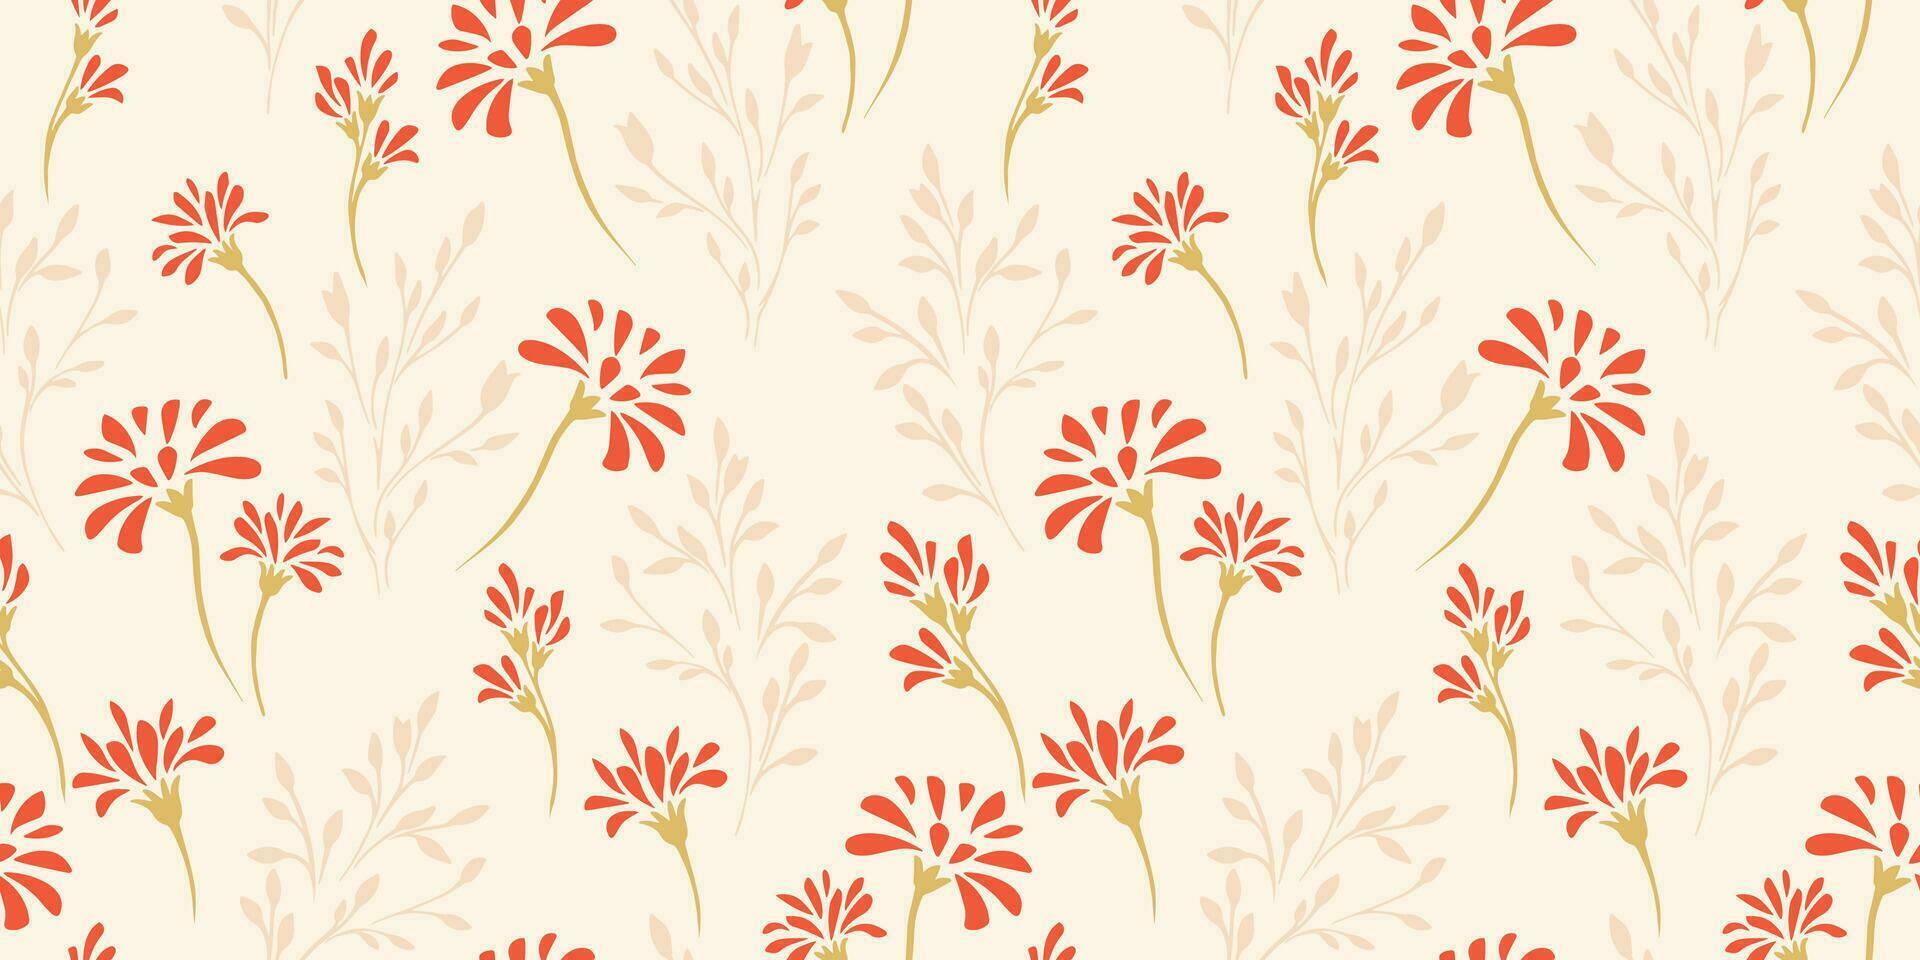 Seamless abstract summer floral pattern. Vector hand drawn sketch. Retro simple silhouette ditsy flowers and branches print. Template for design, wallpaper, fashion, fabric, interior decor